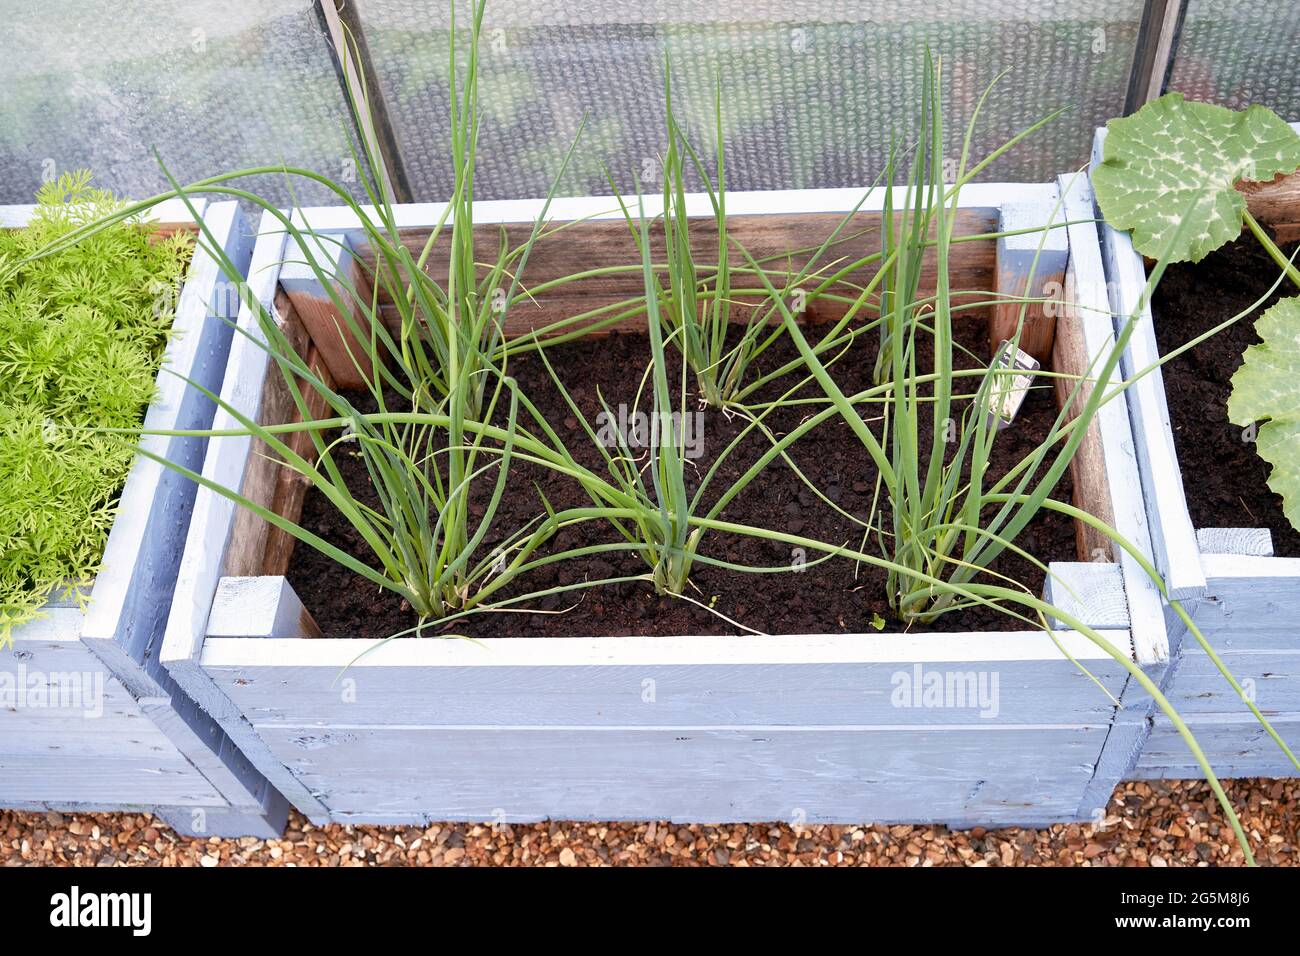 Home grown spring onion plants growing in a rustic blue painted wooden box Stock Photo